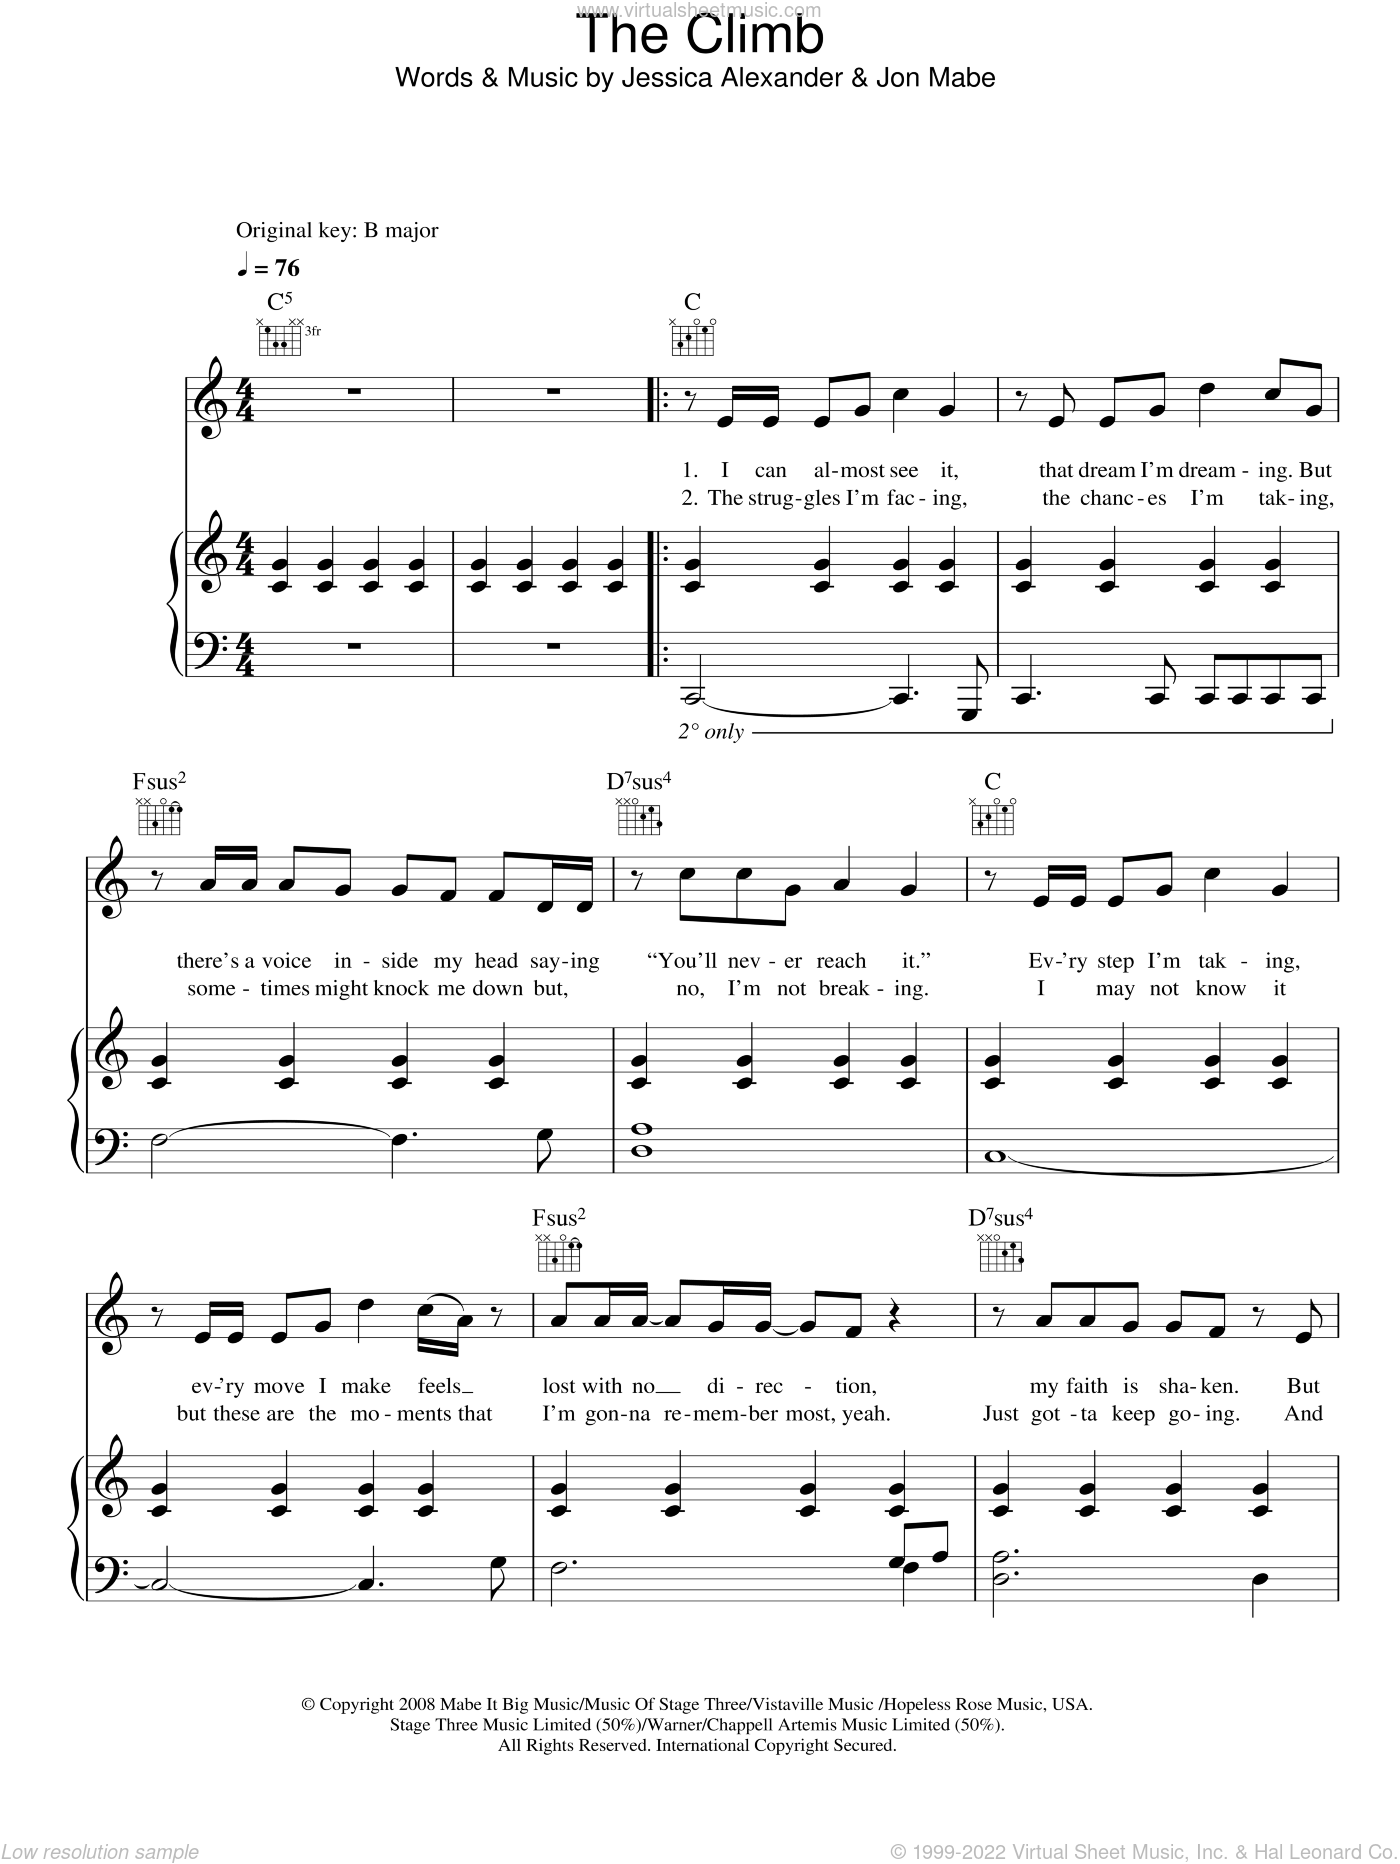 McElderry - The Climb sheet music for voice, piano or guitar